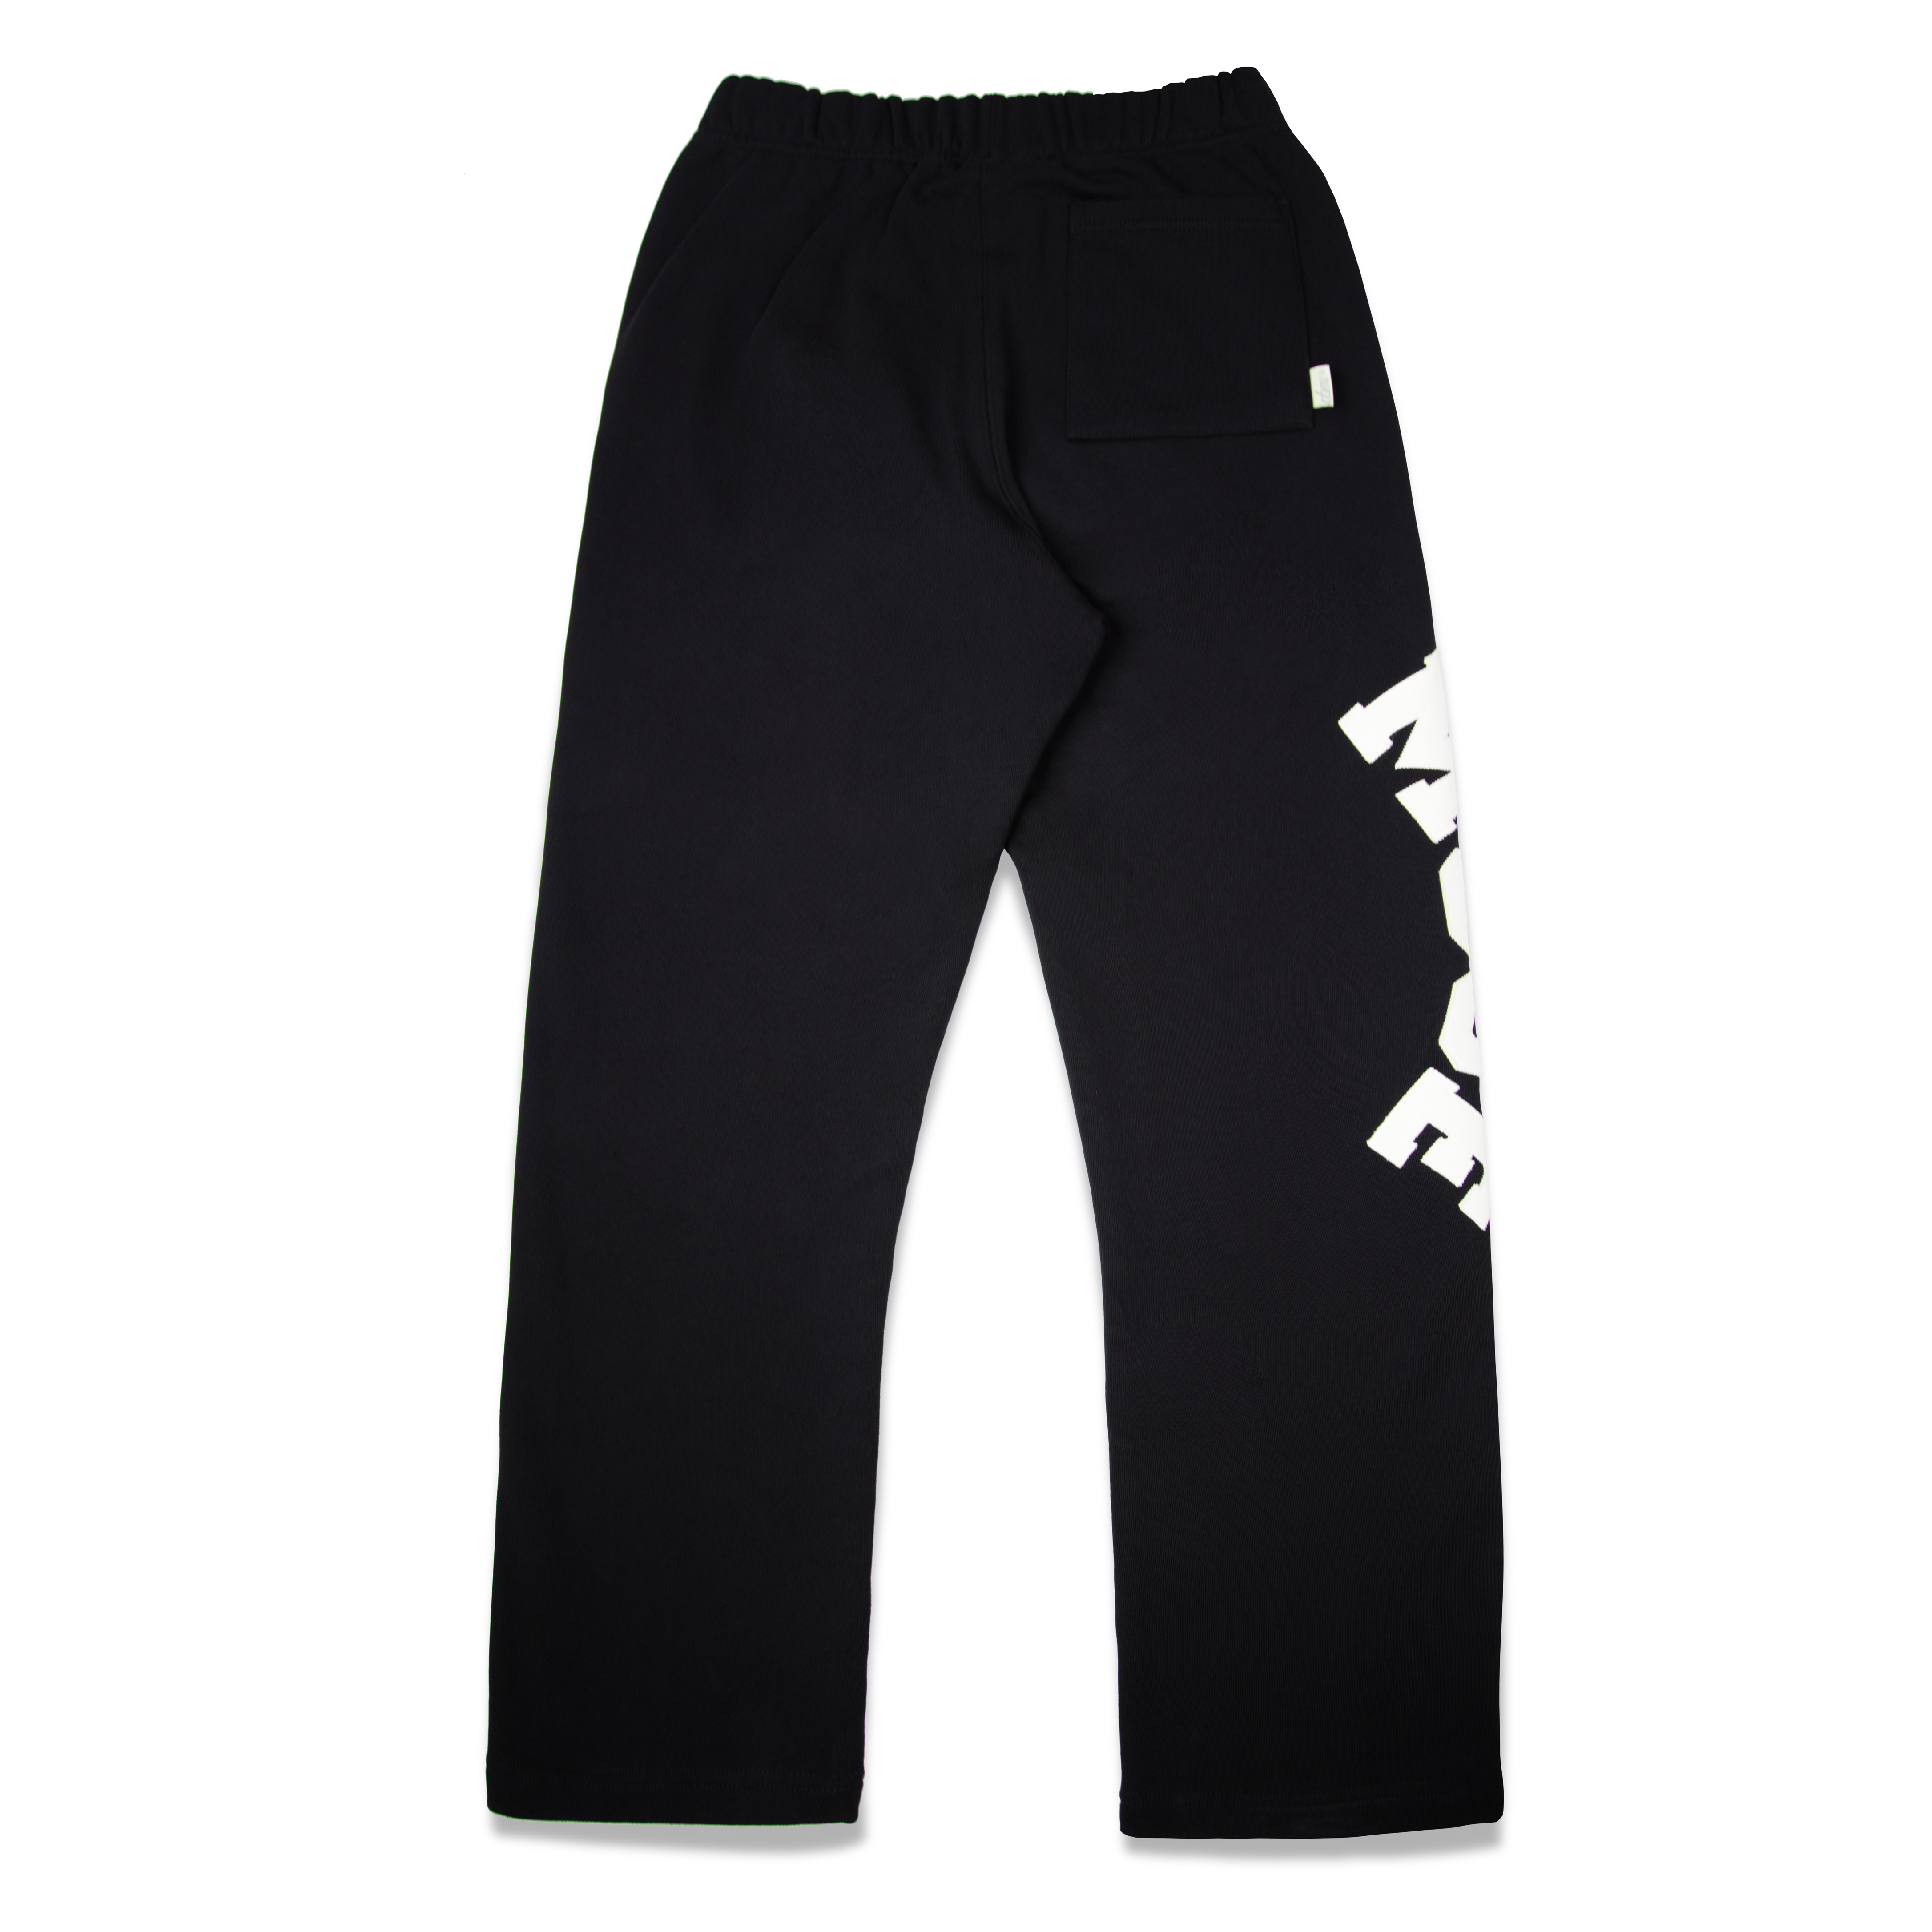 French Terry Pants - Black